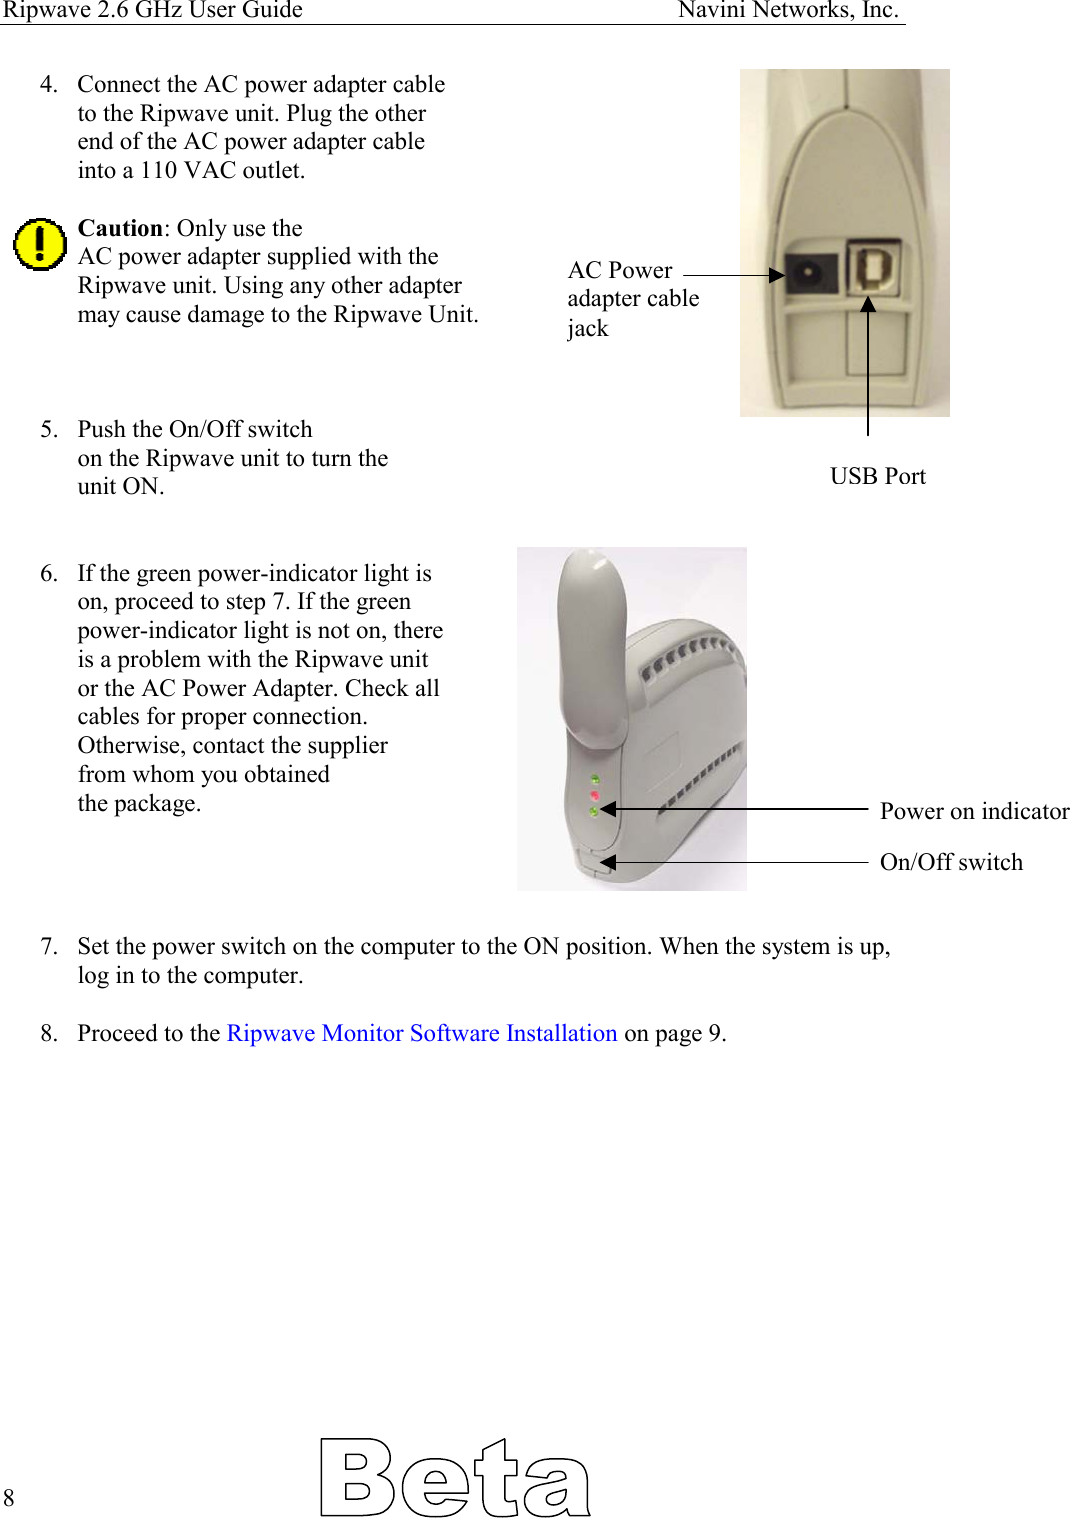 Ripwave 2.6 GHz User Guide                                                            Navini Networks, Inc. 4.  Connect the AC power adapter cable to the Ripwave unit. Plug the other end of the AC power adapter cable  into a 110 VAC outlet.  Caution: Only use the AC power adapter supplied with the  Ripwave unit. Using any other adapter may cause damage to the Ripwave Unit. AC Power  adapter cable  jack    5.  Push the On/Off switch on the Ripwave unit to turn the  unit ON. USB Port  6.  If the green power-indicator light is on, proceed to step 7. If the green  power-indicator light is not on, there is a problem with the Ripwave unit or the AC Power Adapter. Check all  cables for proper connection.  Otherwise, contact the supplier  from whom you obtained  the package.  Power on indicator  On/Off switch   7.  Set the power switch on the computer to the ON position. When the system is up, log in to the computer.   8.  Proceed to the Ripwave Monitor Software Installation on page 9.                8